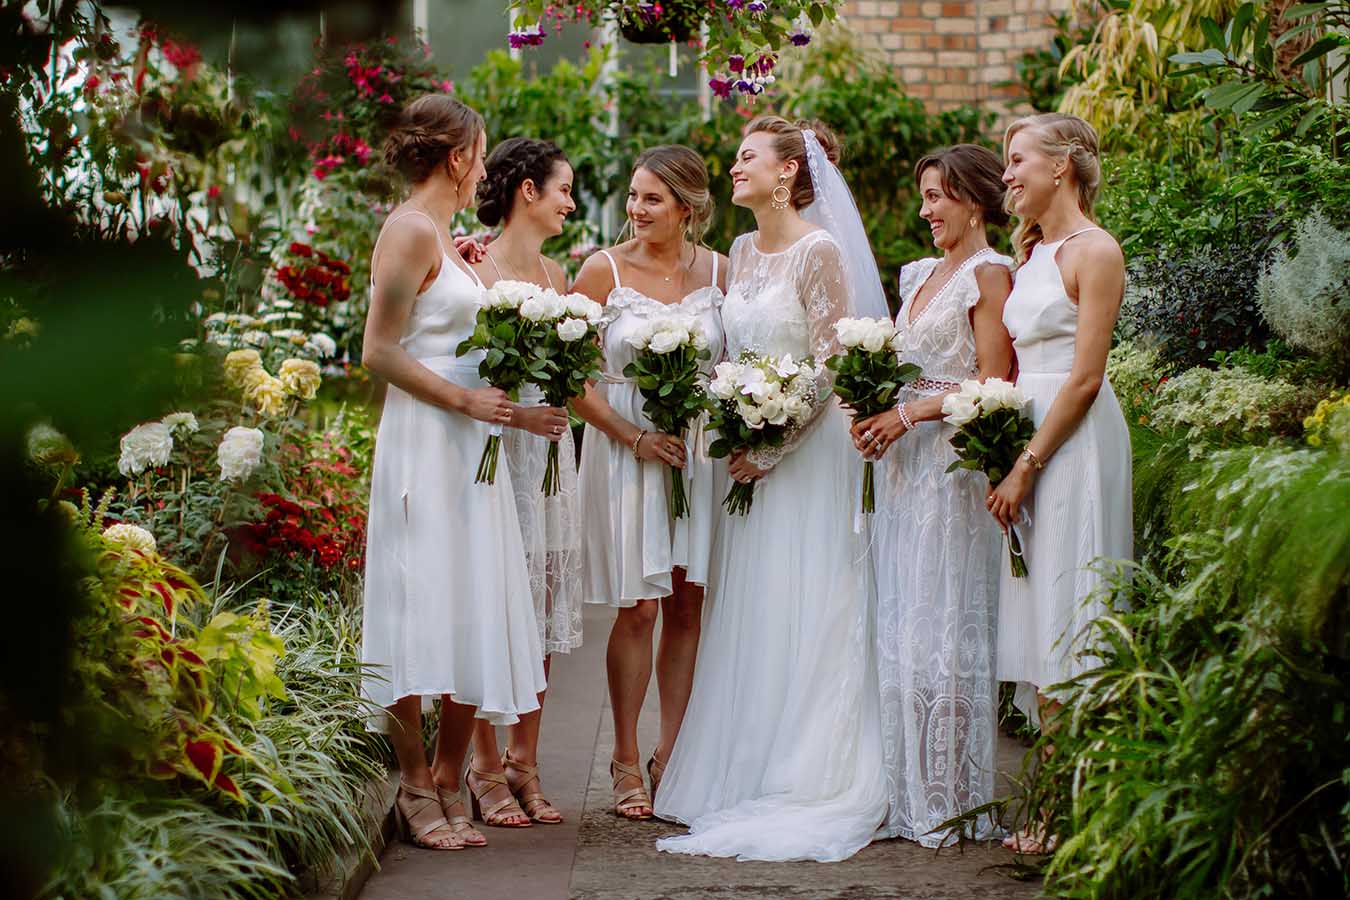 Auckland Wedding Photographer.Bride and bridesmaids at the bridal party outside Auckland Wintergardens